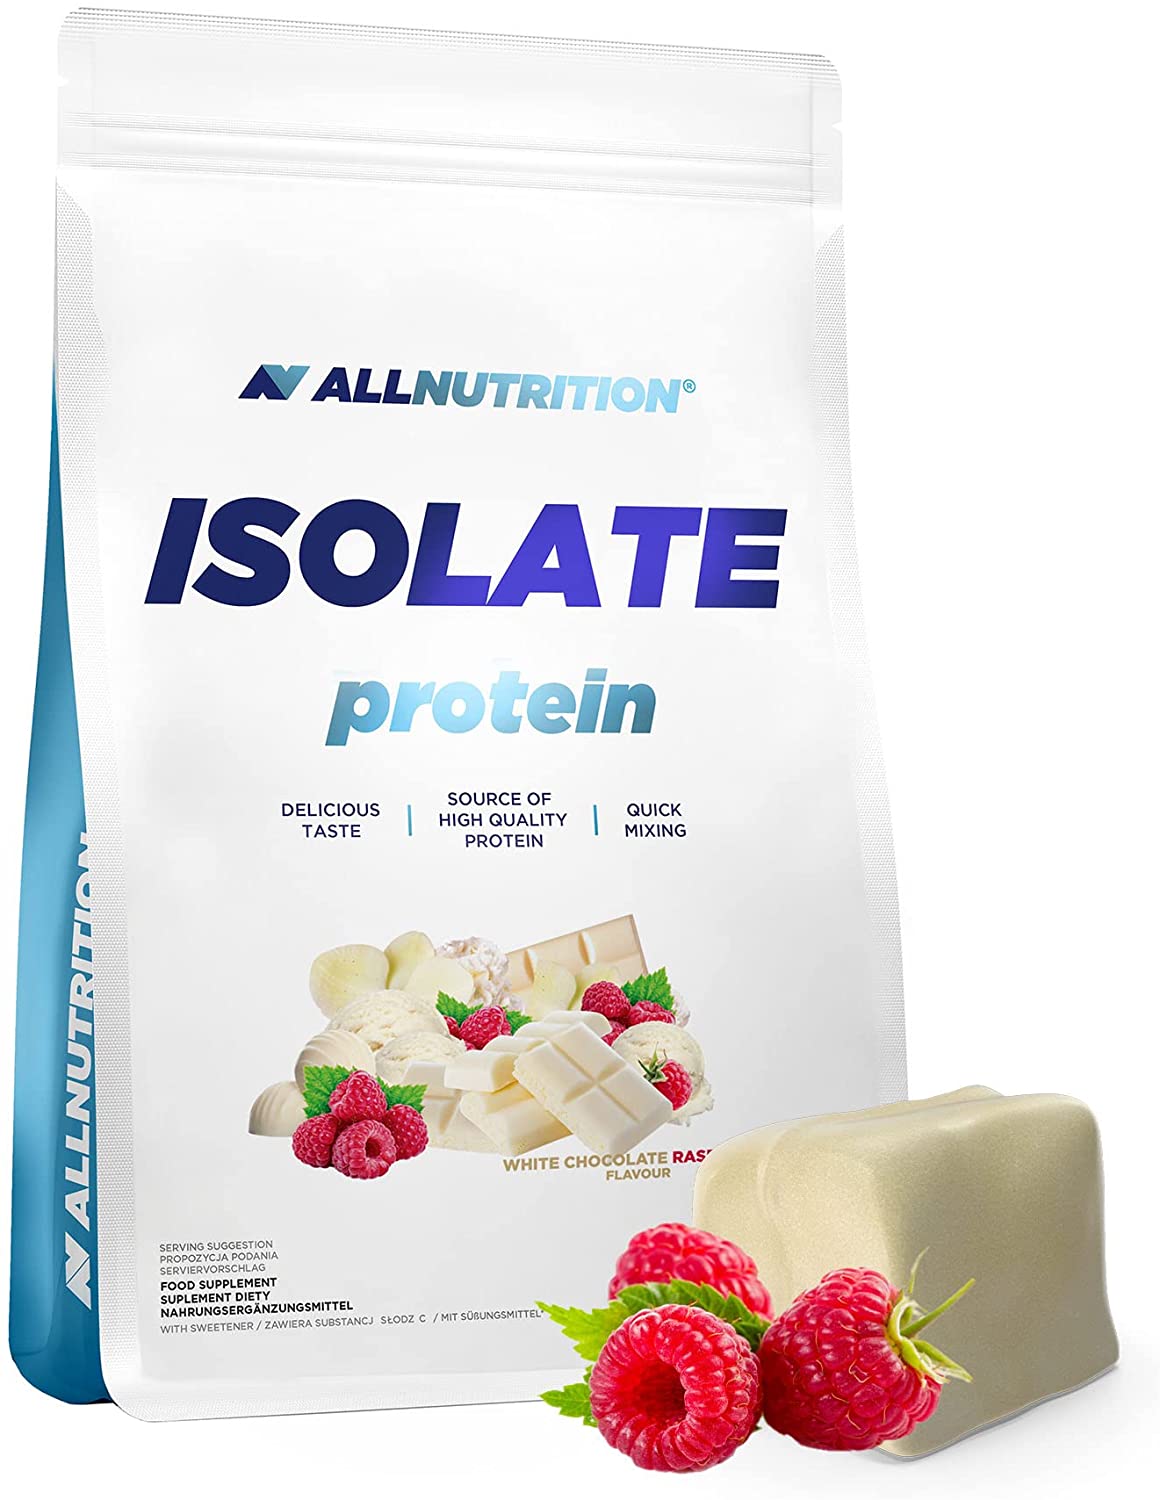 All Nutrition Isolate Protein 908g